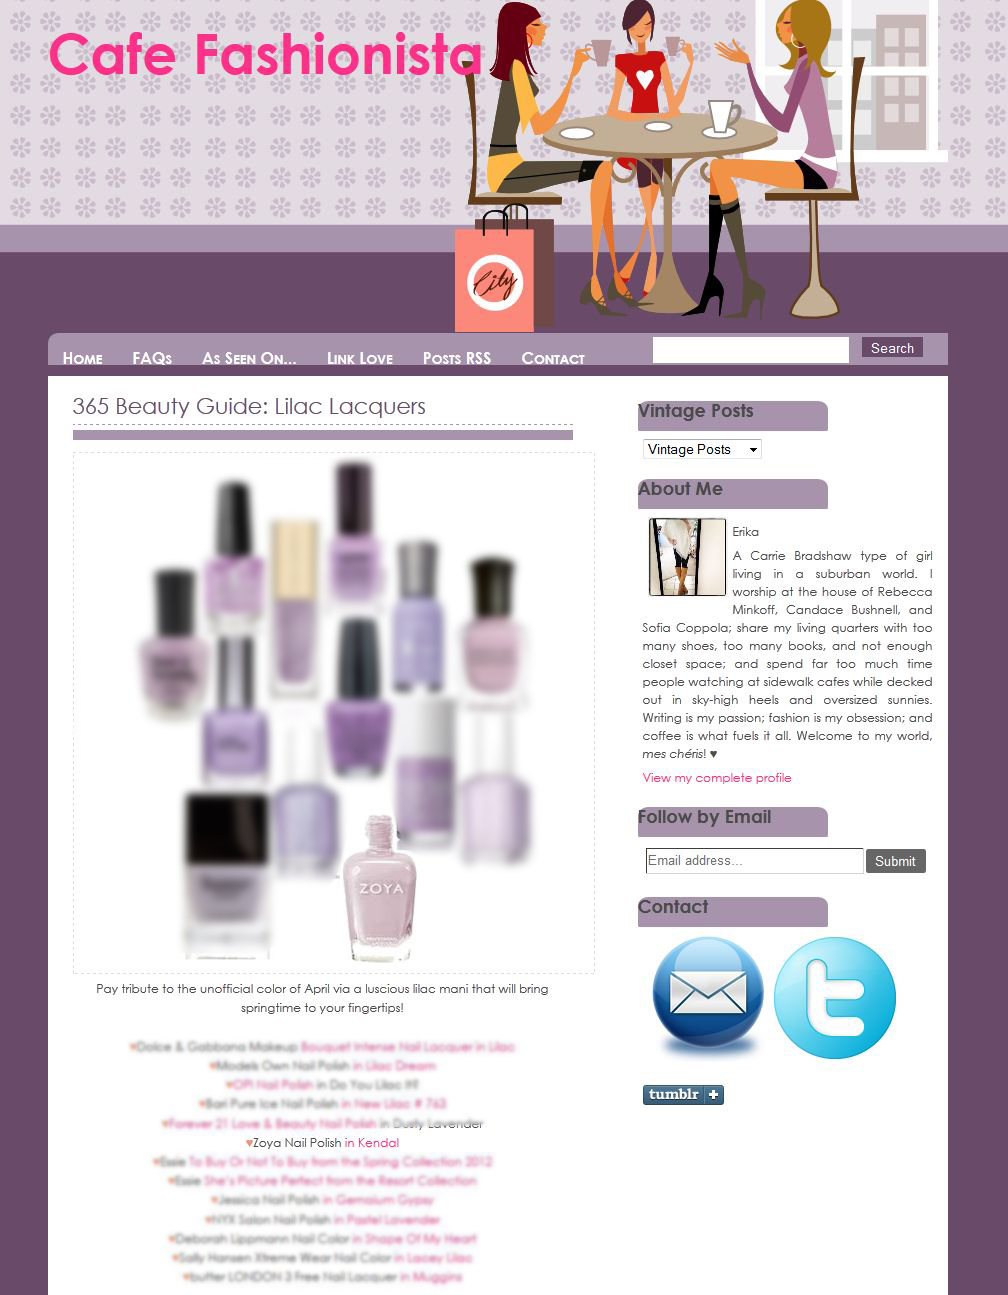 Other best-selling lilac and lavender shades include Zoya Nail Polish in